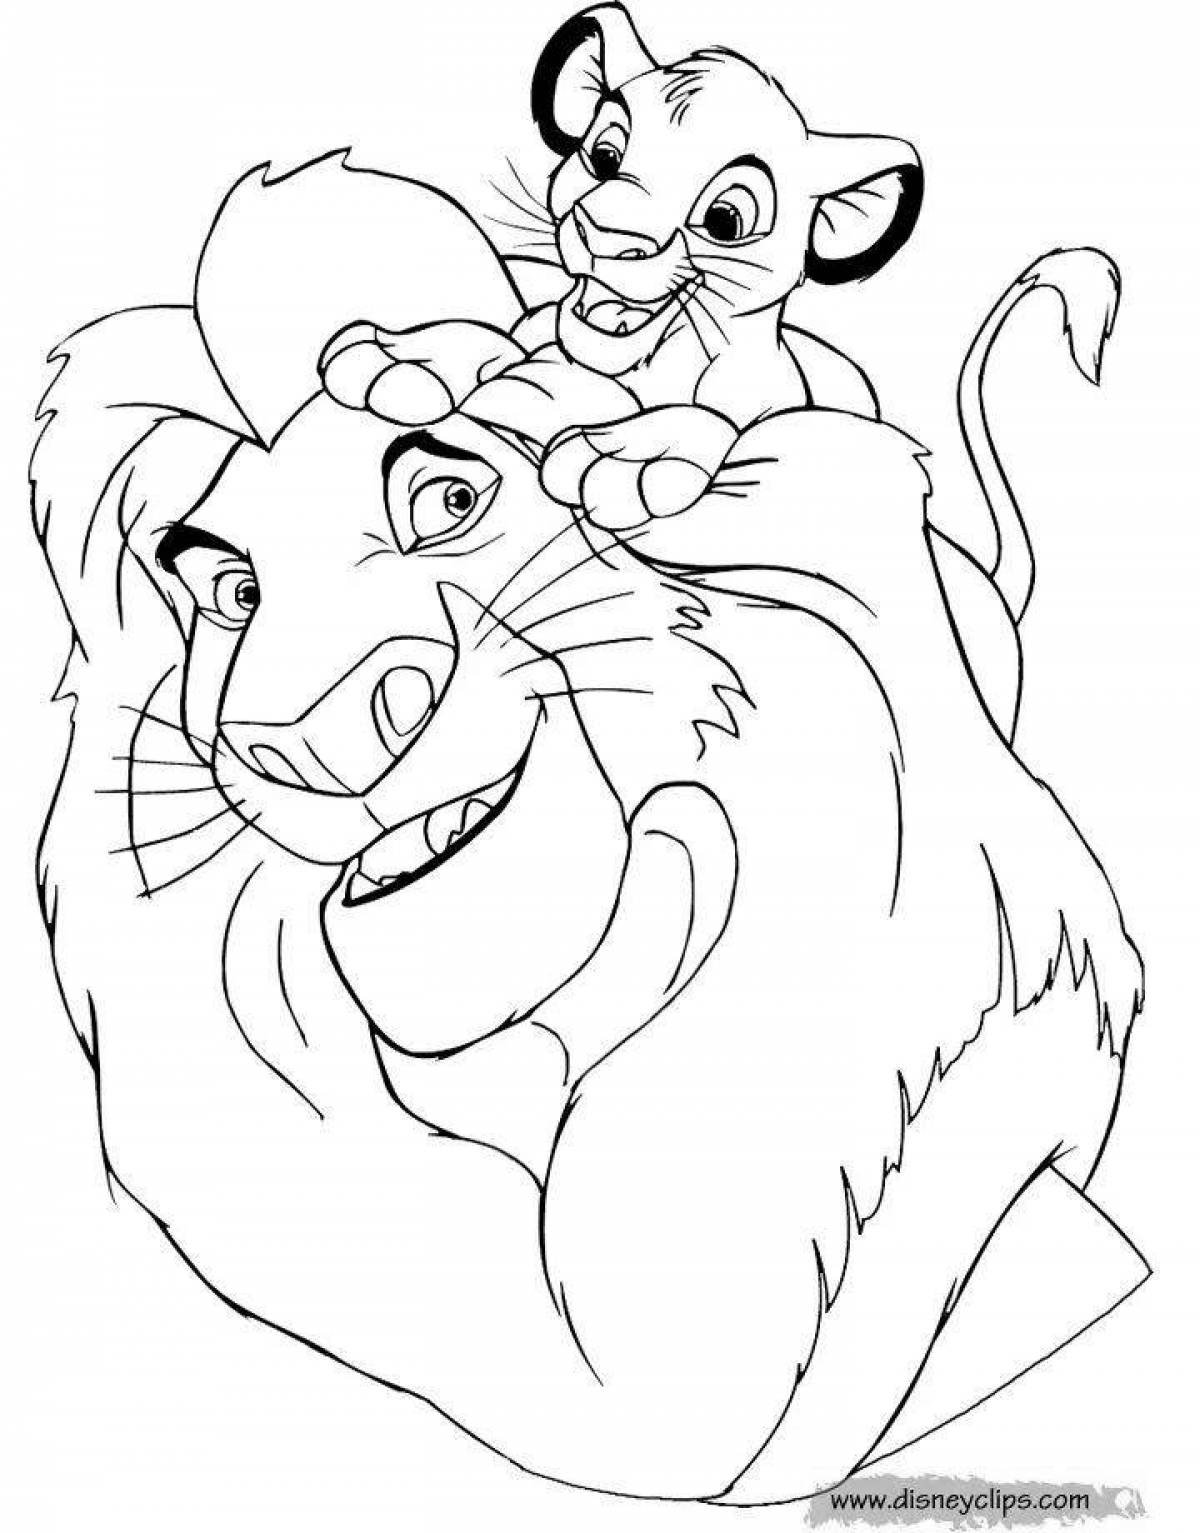 Great lion king coloring book